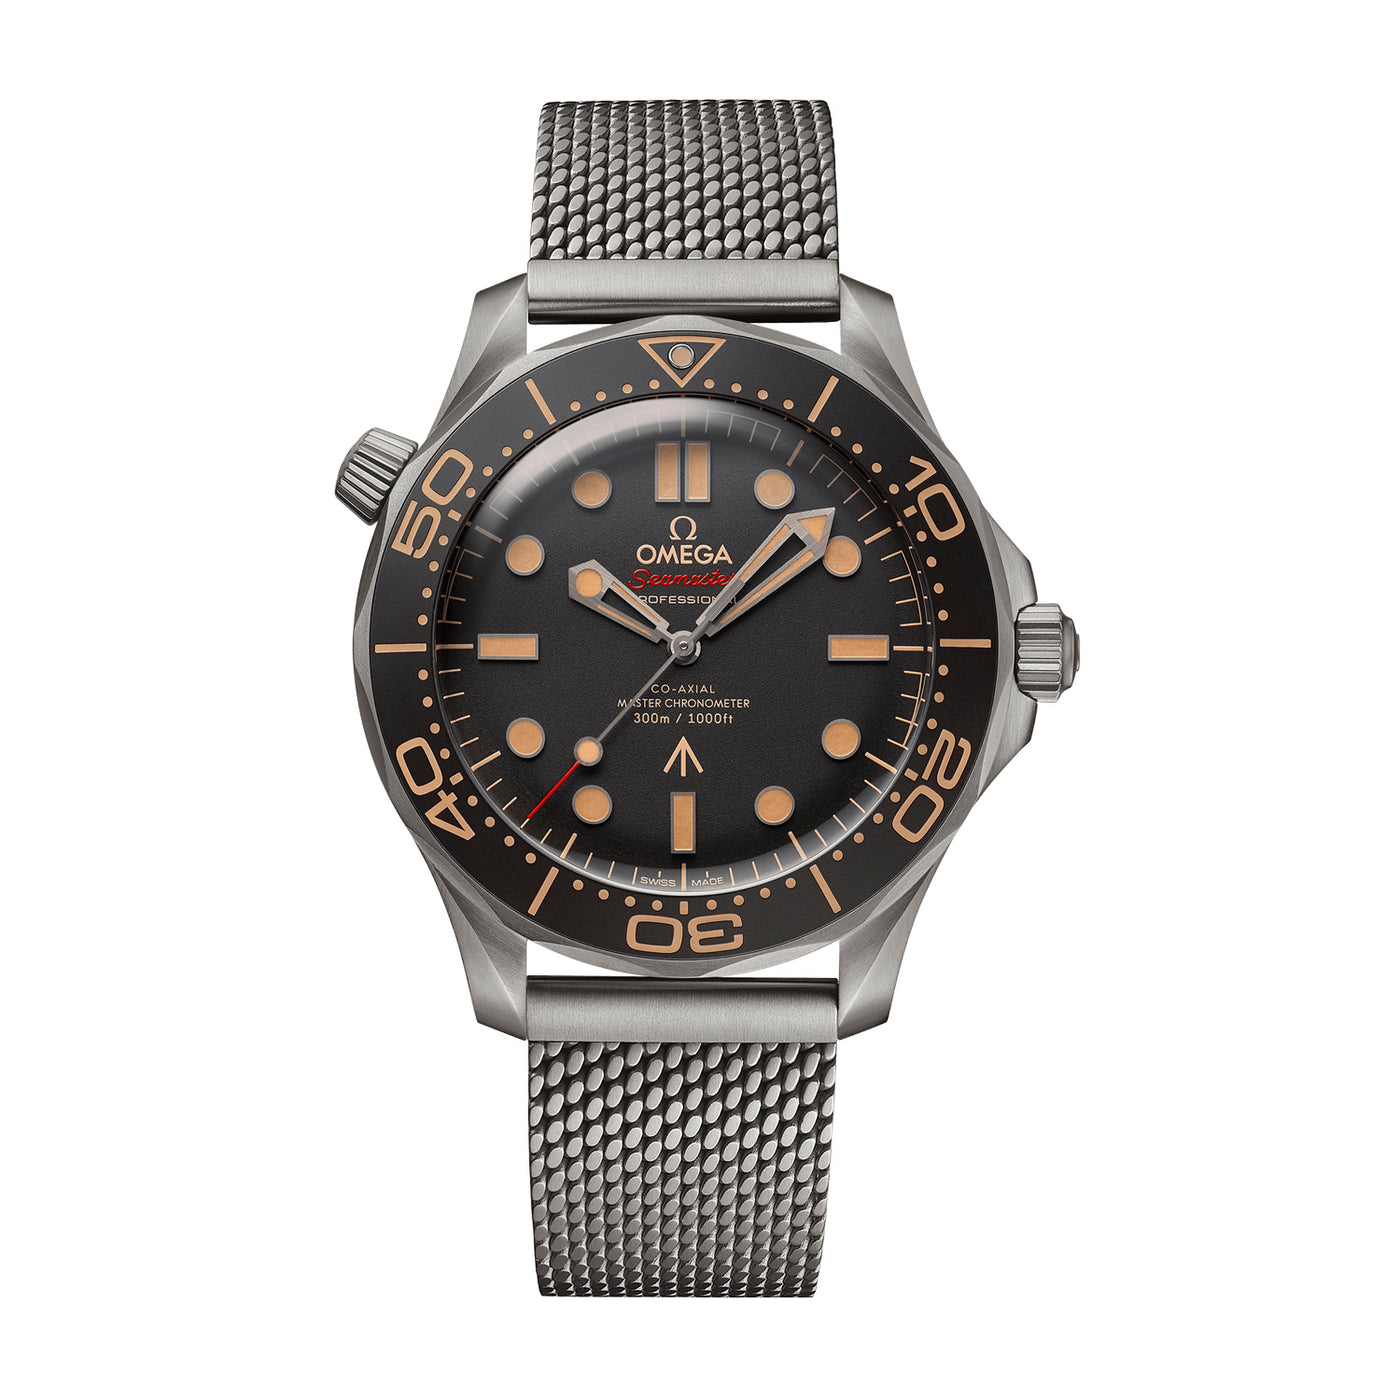 OMEGA Seamaster Diver 300m 007 Edition "No Time to Die" Automatic – 210.90.42.20.01.001